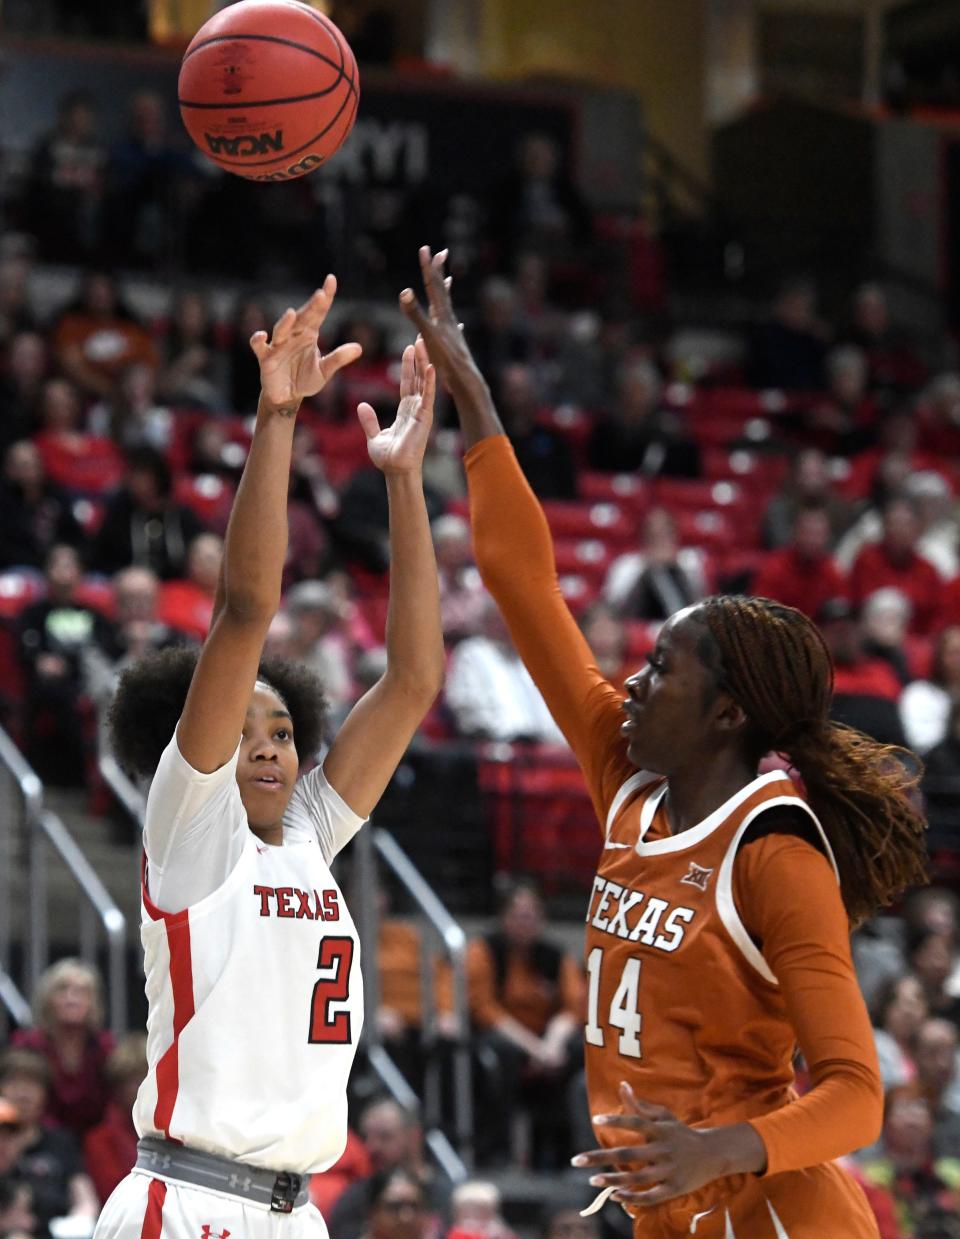 Texas Tech's guard Kilah Freelon (2), left, shoots the ball against Texas in a Big 12 women's basketball game, Wednesday, Jan. 18, 2023, at United Supermarkets Arena.